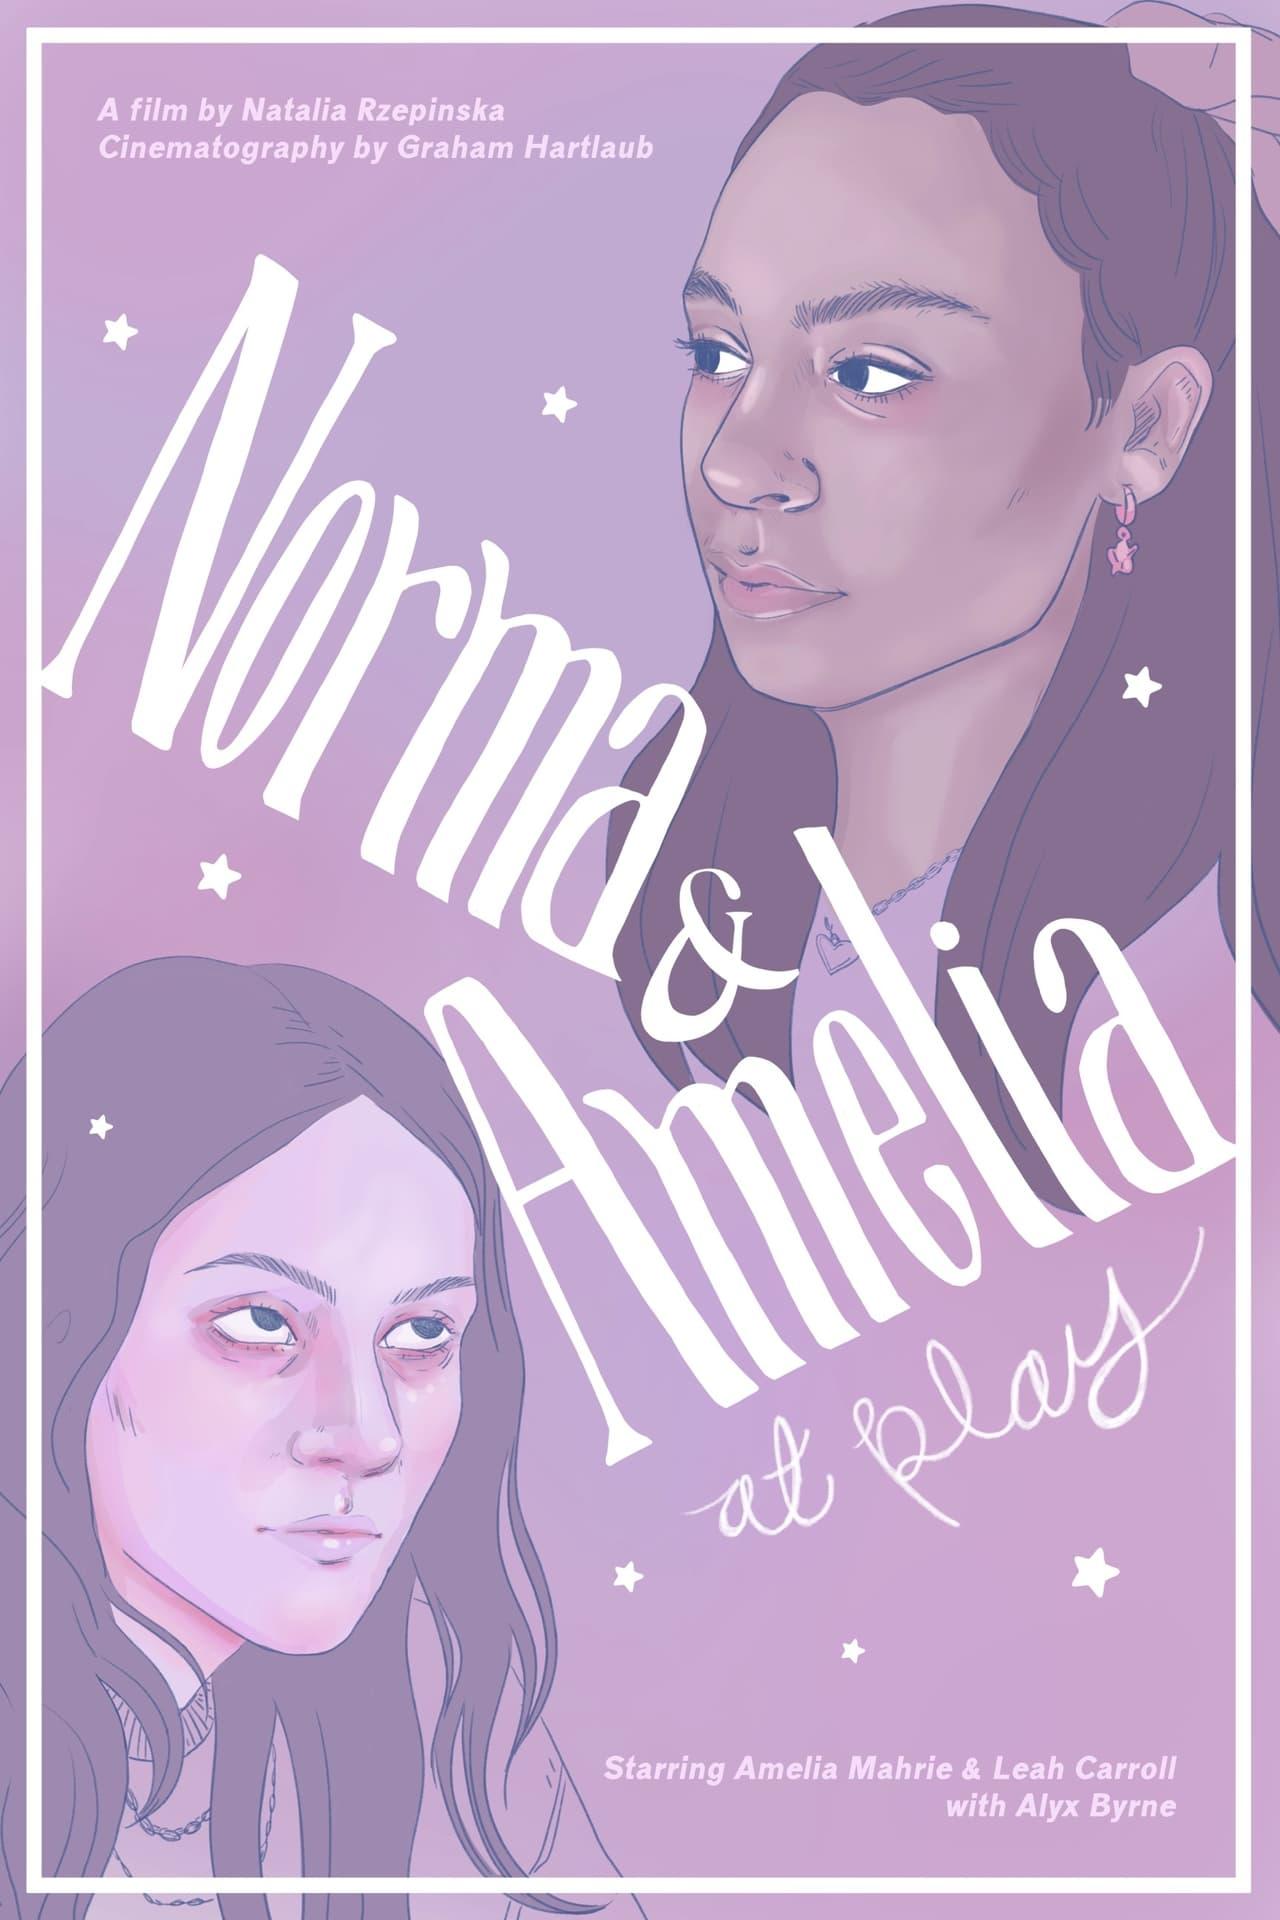 Norma and Amelia at Play poster